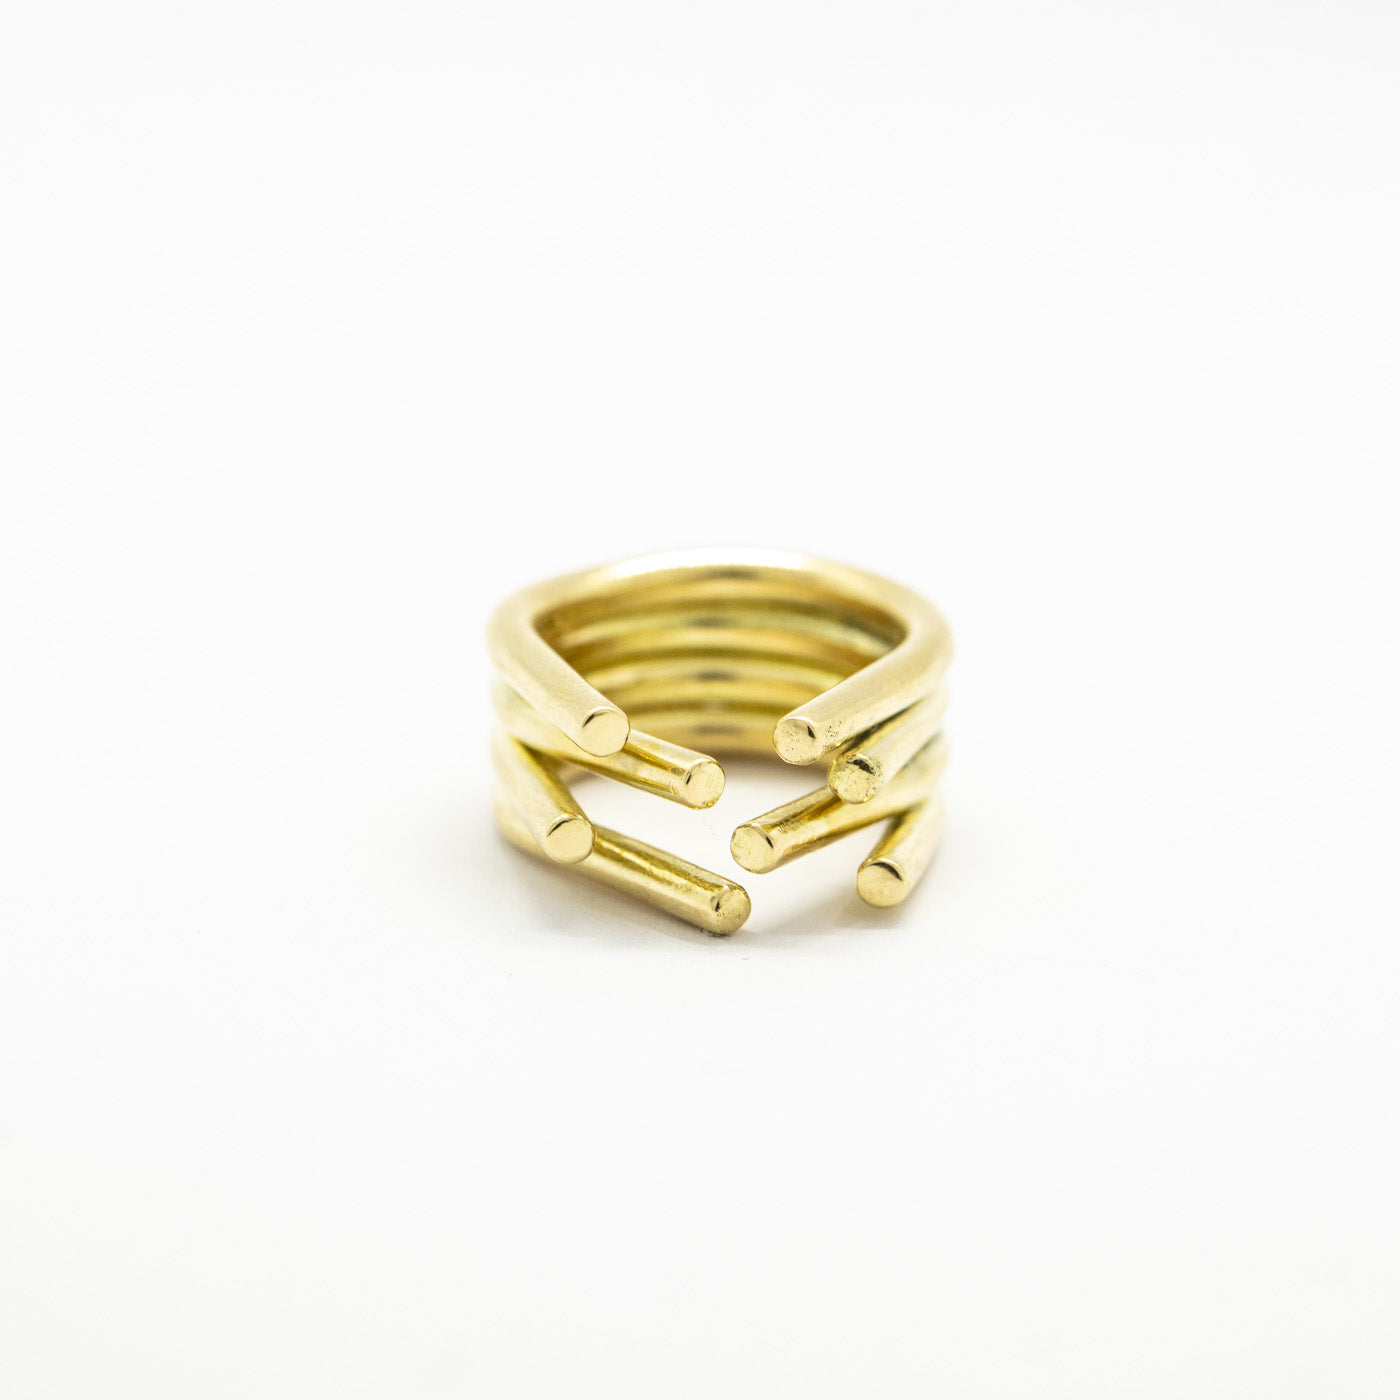 ring chaotic gold 4 curves 14ct or 18ct solid gold product view innan jewellery independent atelier berlin